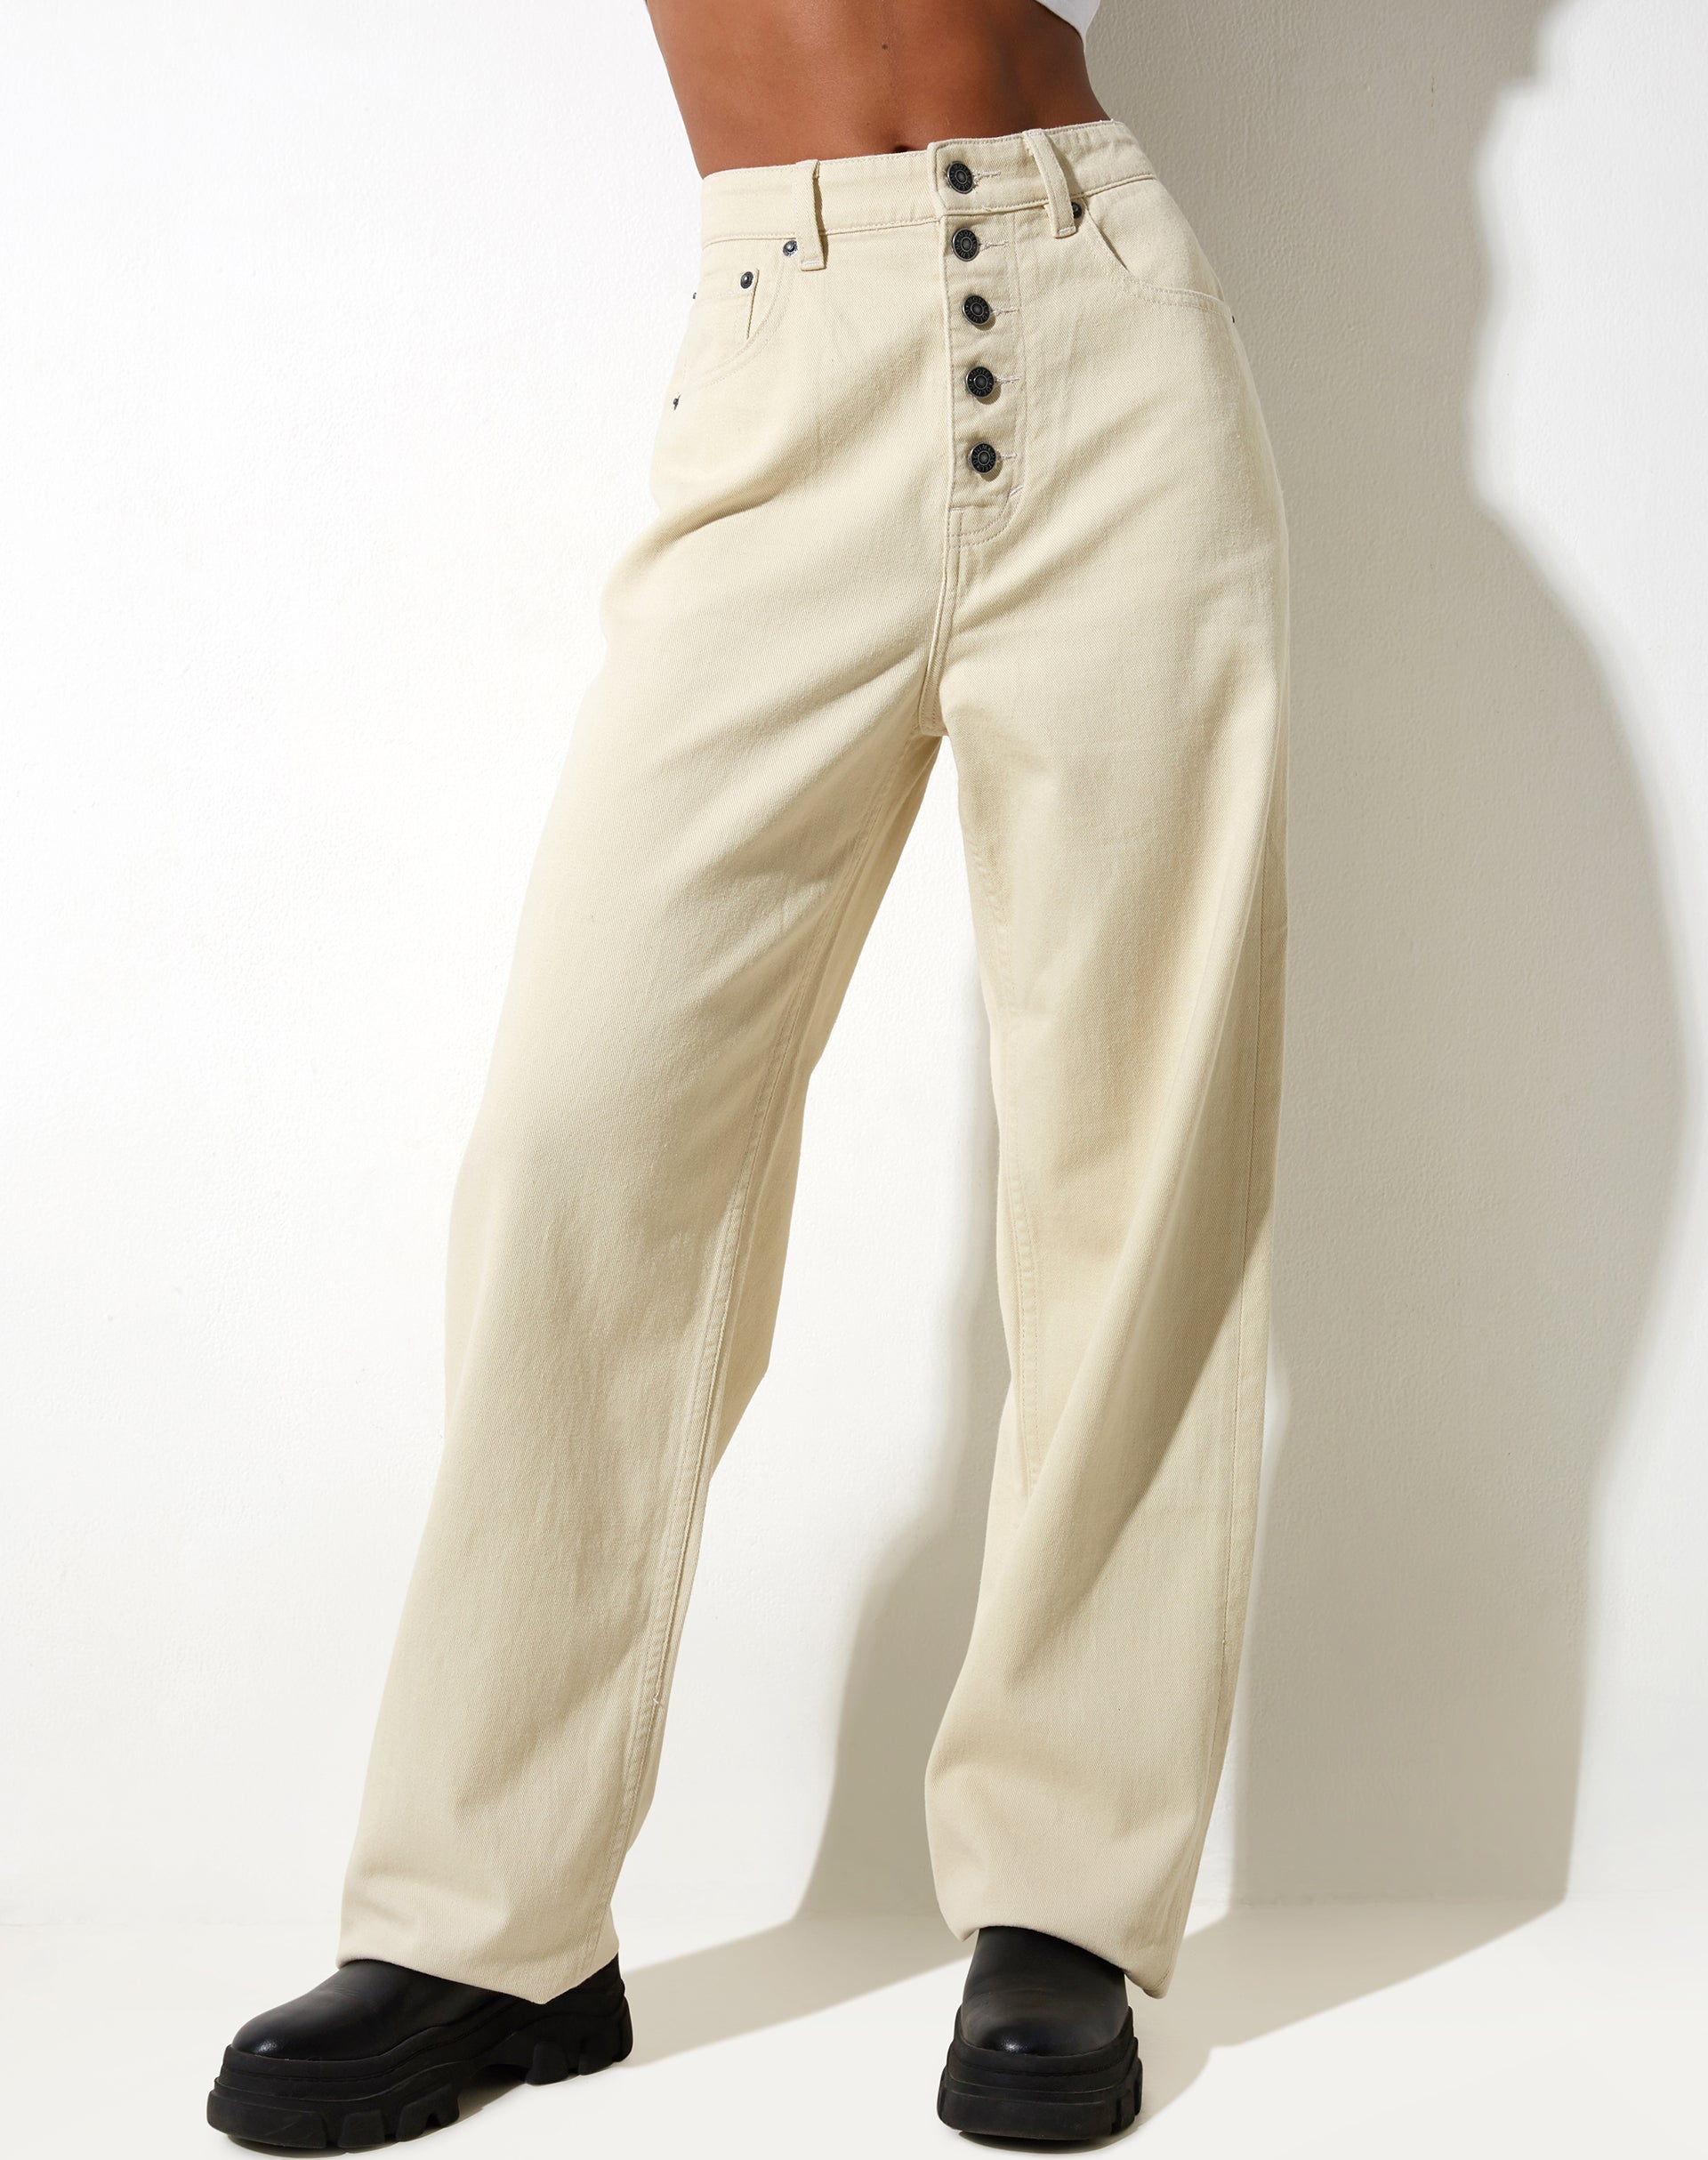 image of Exposed Button Parallel Jeans in Warm Cream